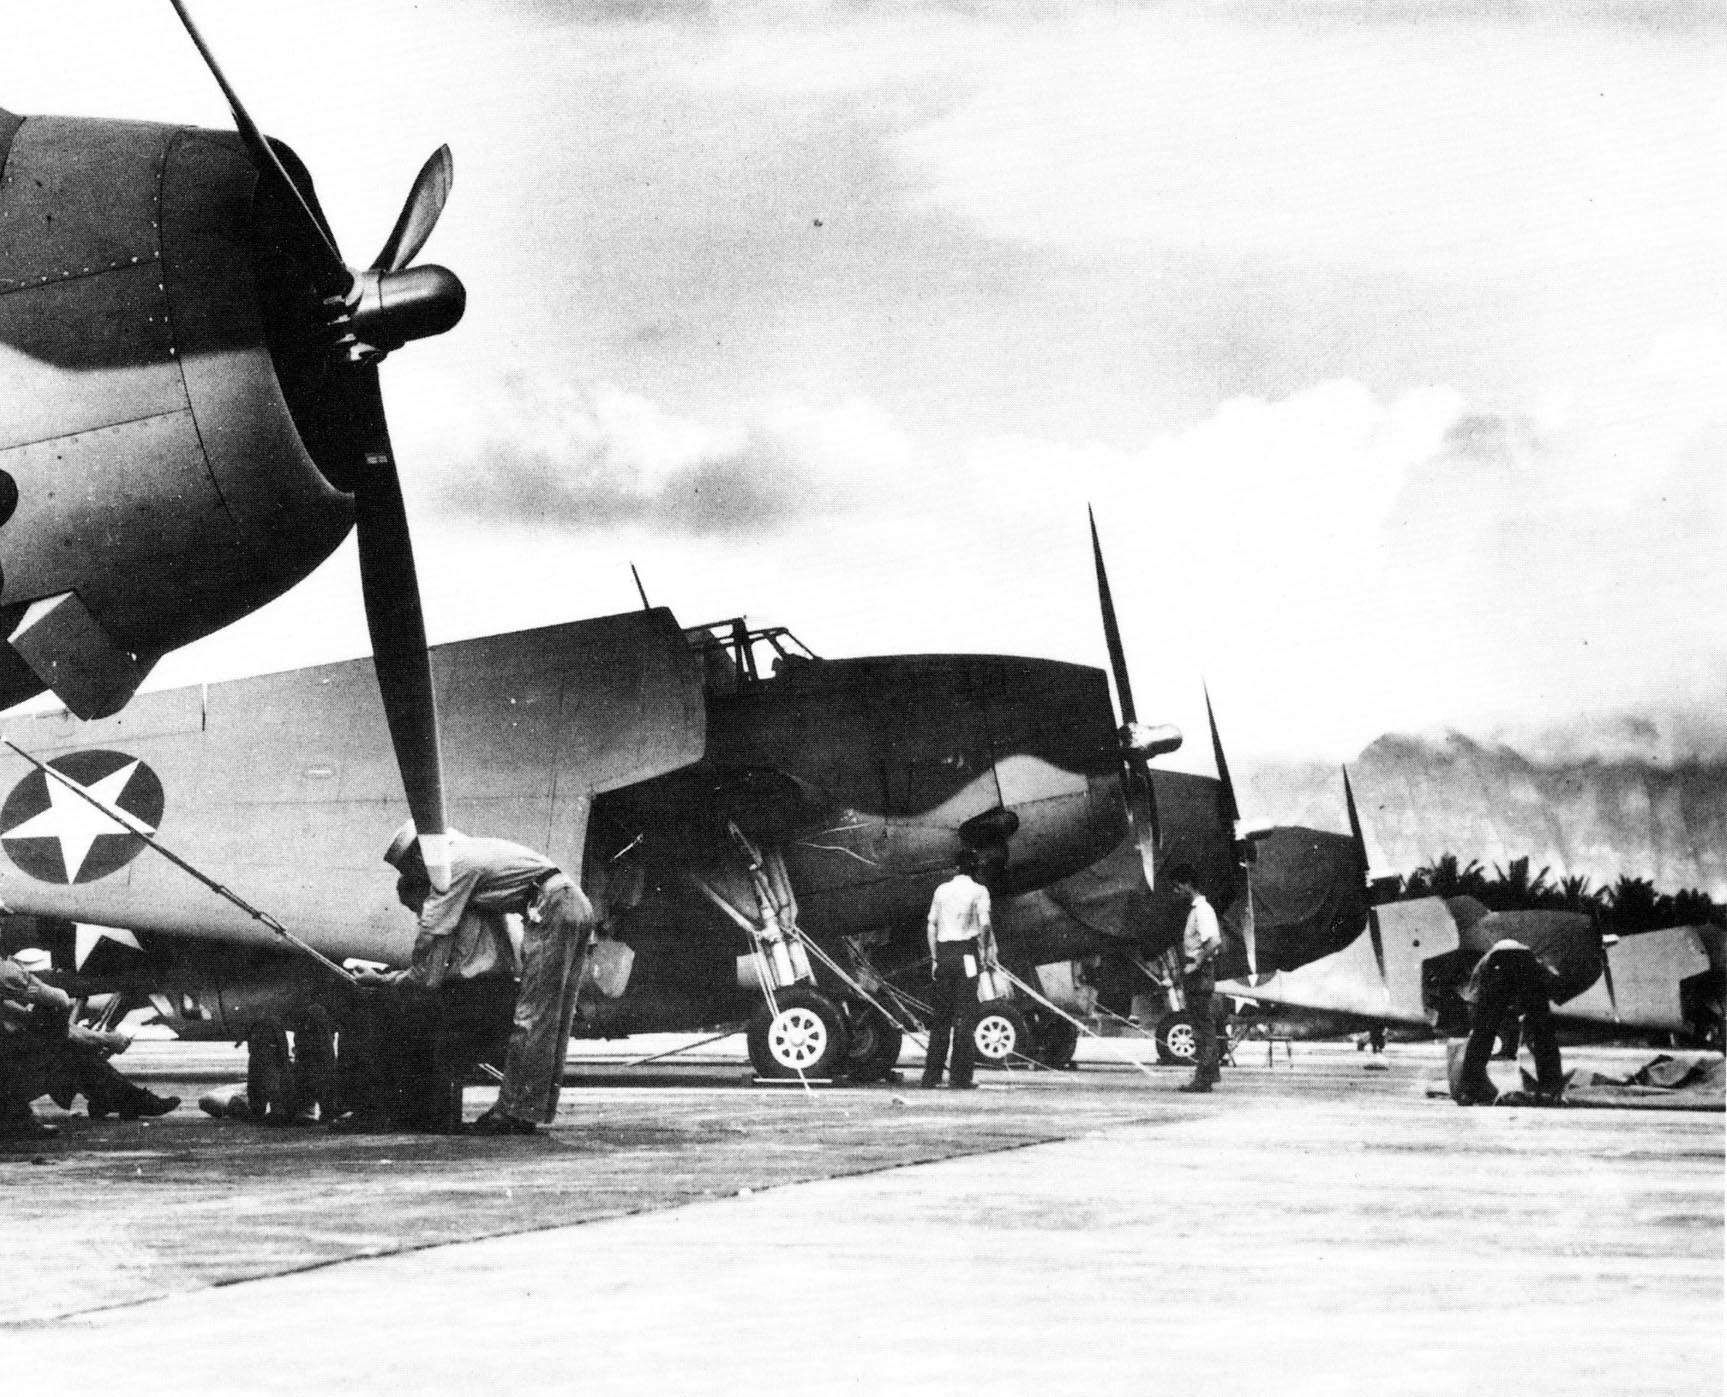 A squadron of TBM Avengers tied down in Hawaii during WWII. [Photo Credit: National Archives]